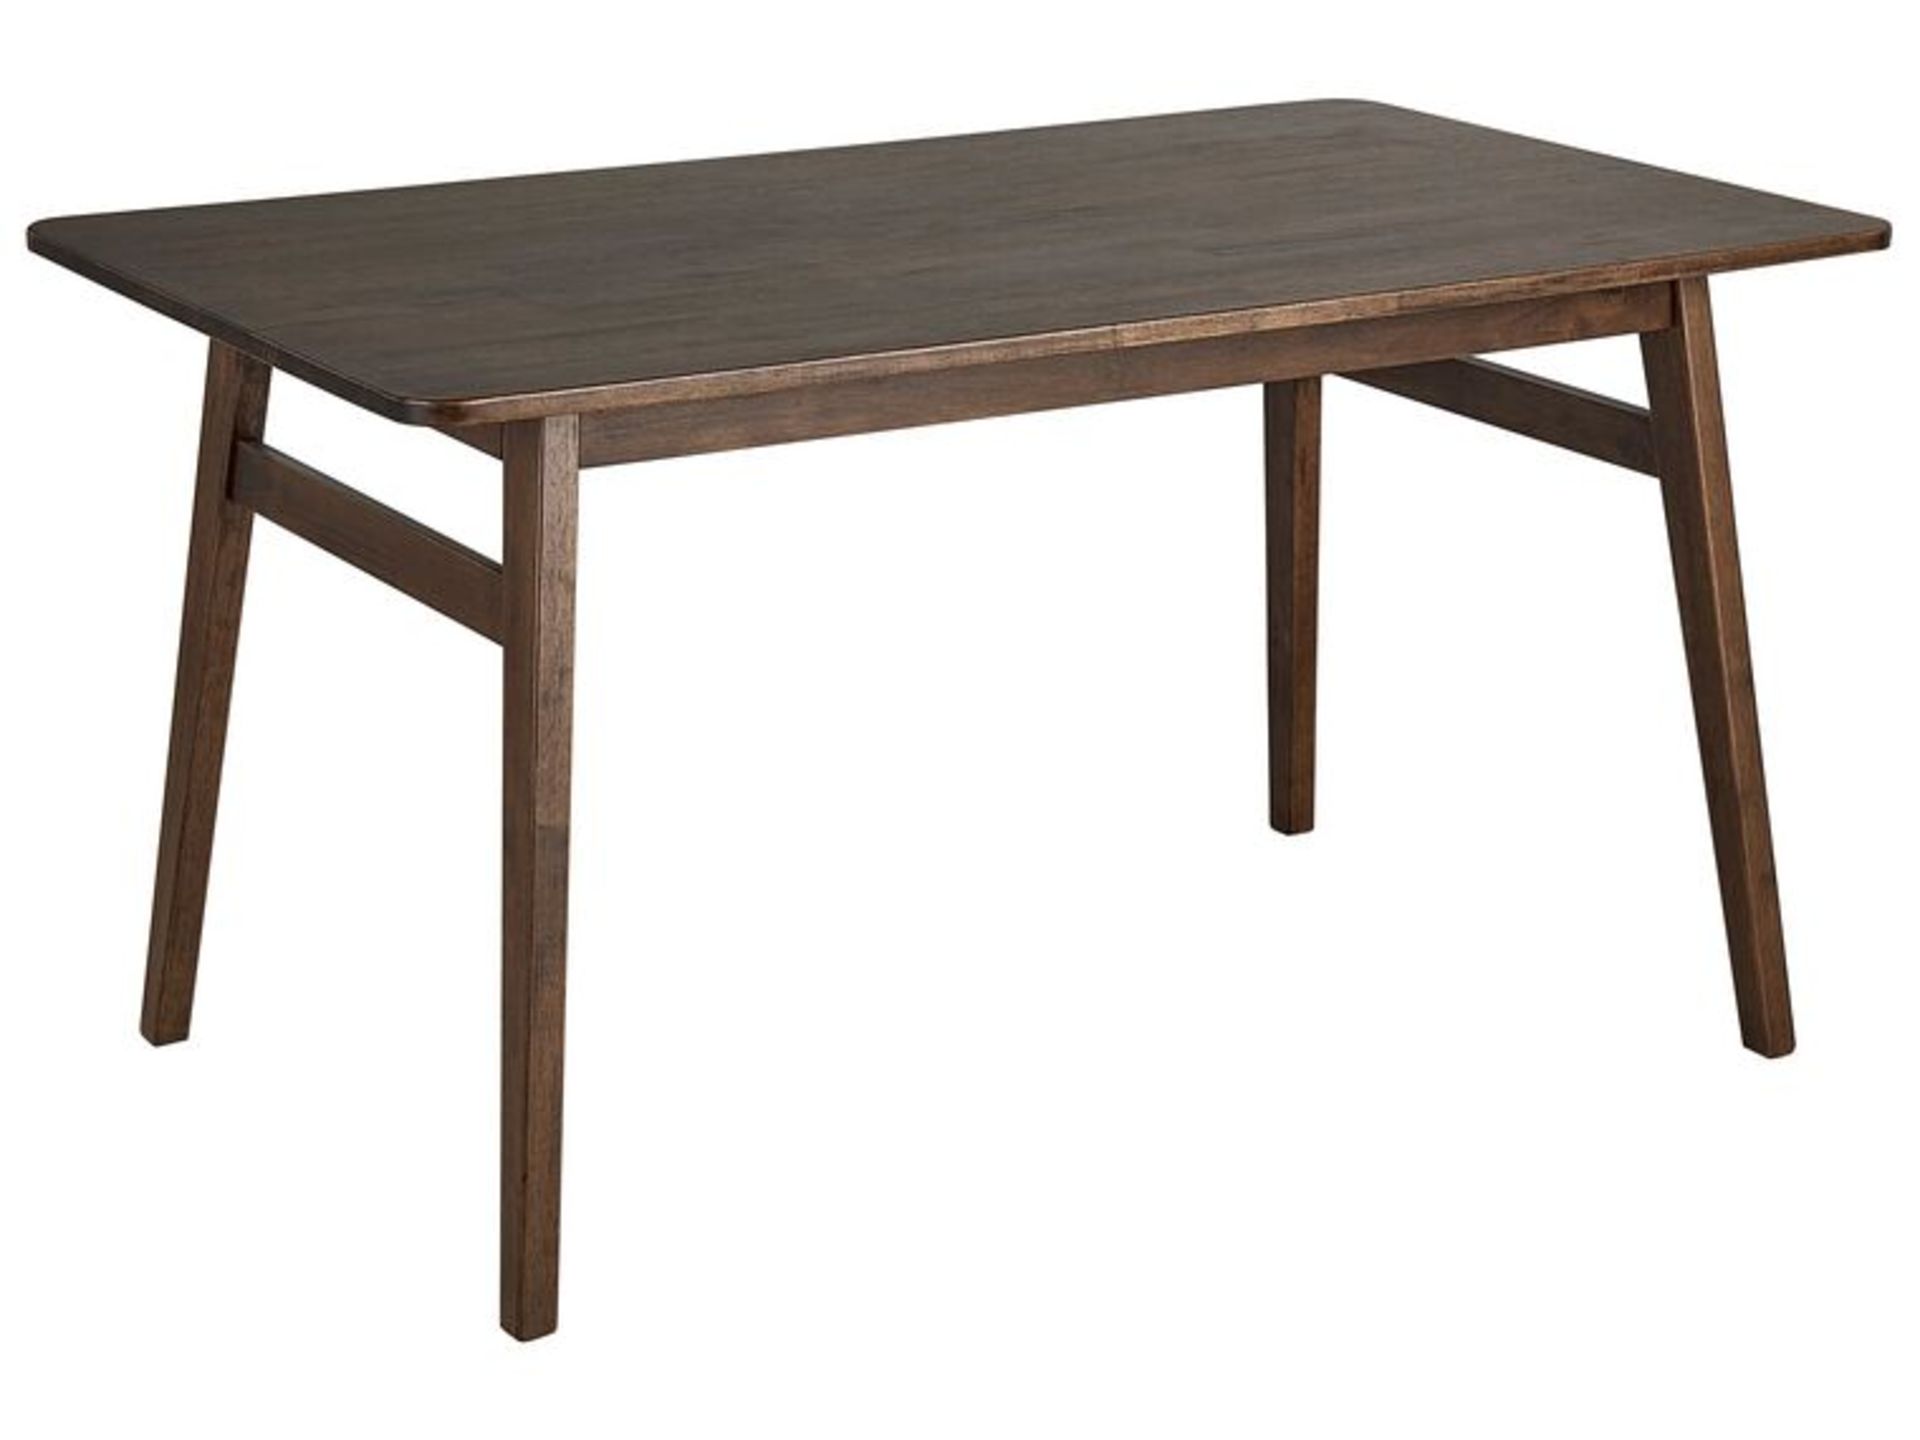 Ventera Dining Table 140 x 85 cm Dark Wood. - R14. RRP £539.99. Complete your dining room decor with